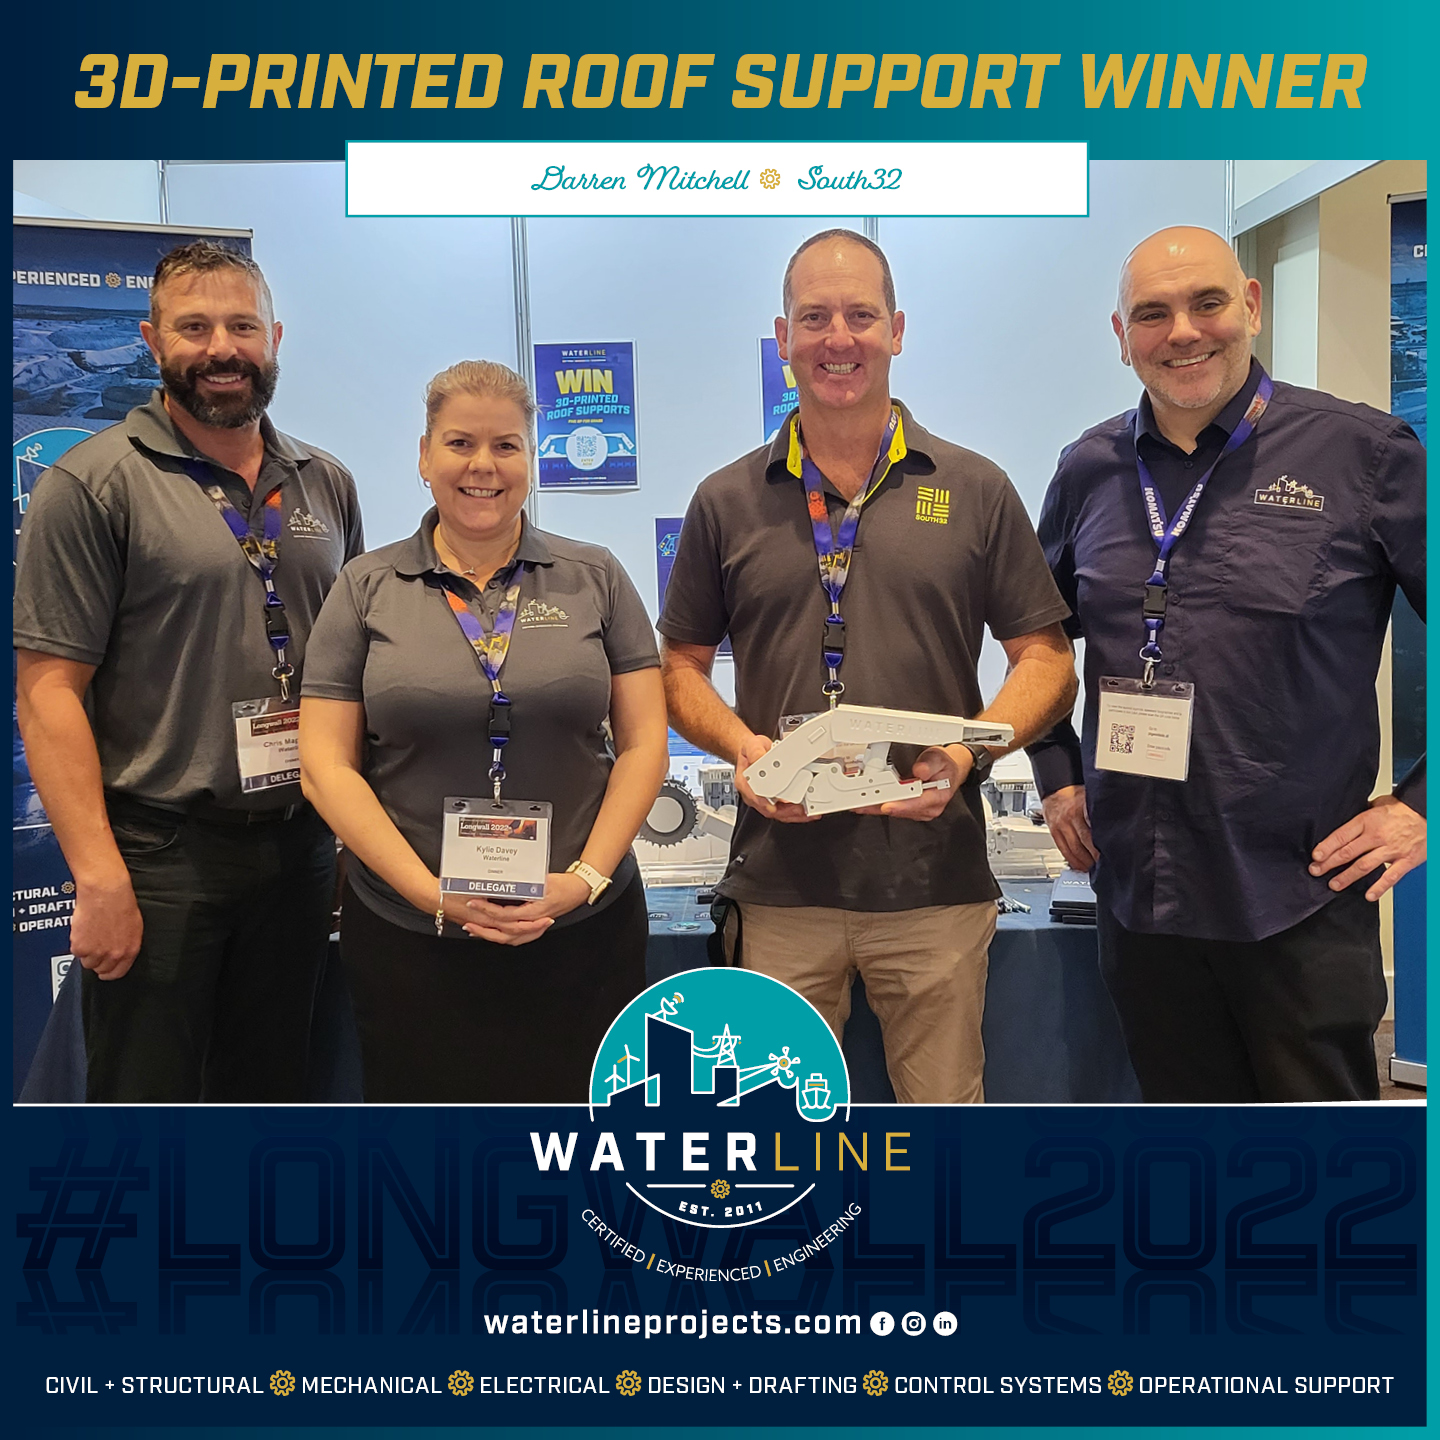 Waterline's Chris Mapleson, Kylie Davey, with Darren Mitchell from South32, winner of one of our 3D-printed roof supports, and me (Dan Harrison)